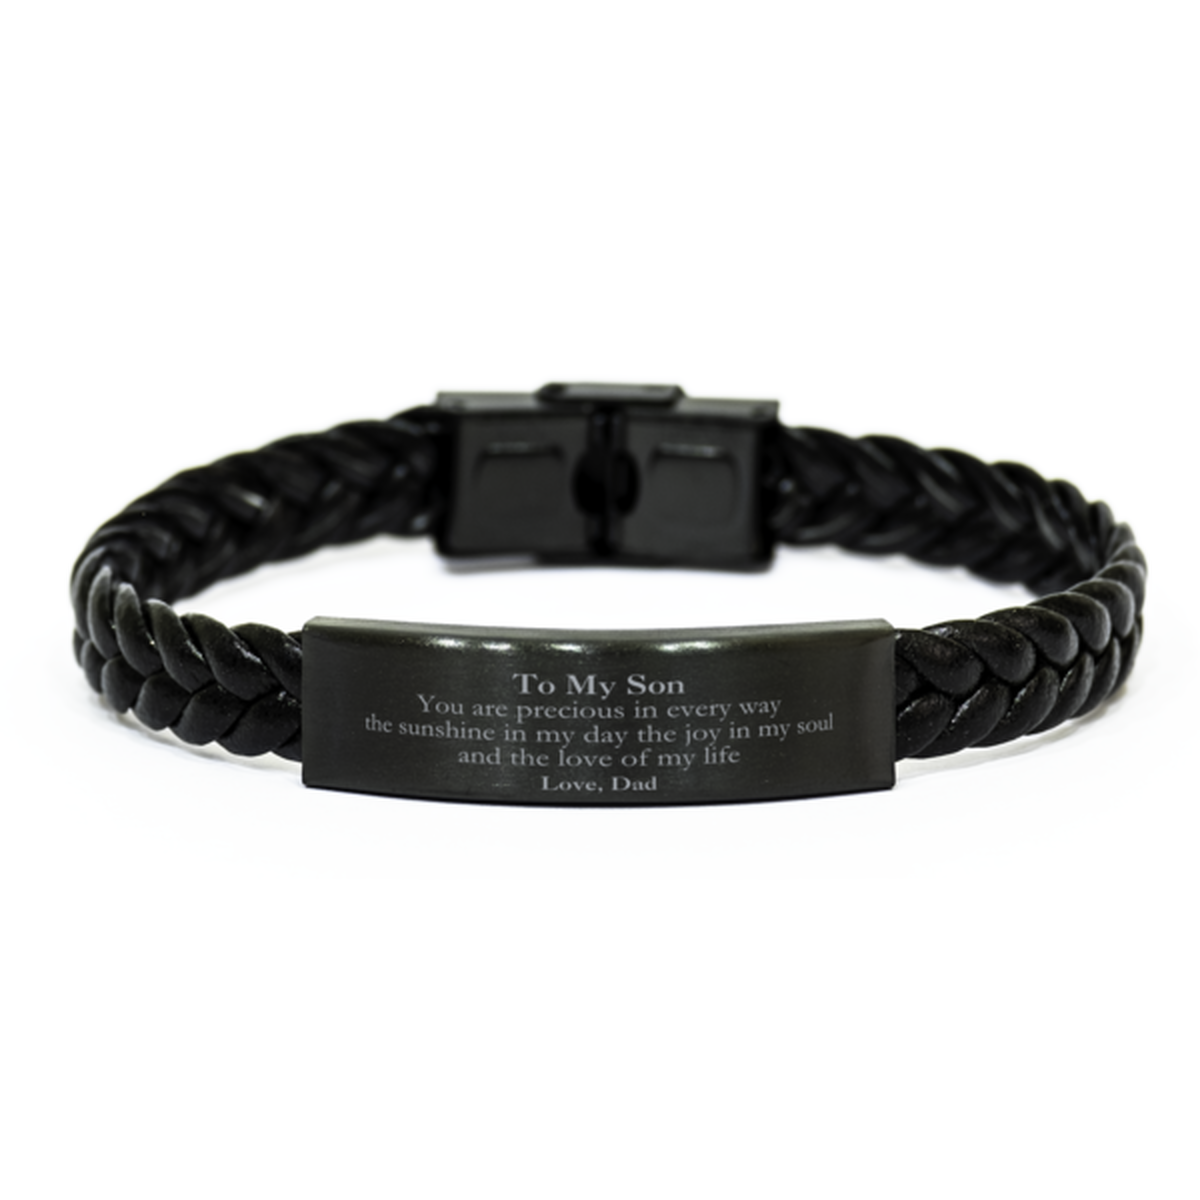 Graduation Gifts for Son Braided Leather Bracelet Present from Dad, Christmas Son Birthday Gifts Son You are precious in every way the sunshine in my day. Love, Dad